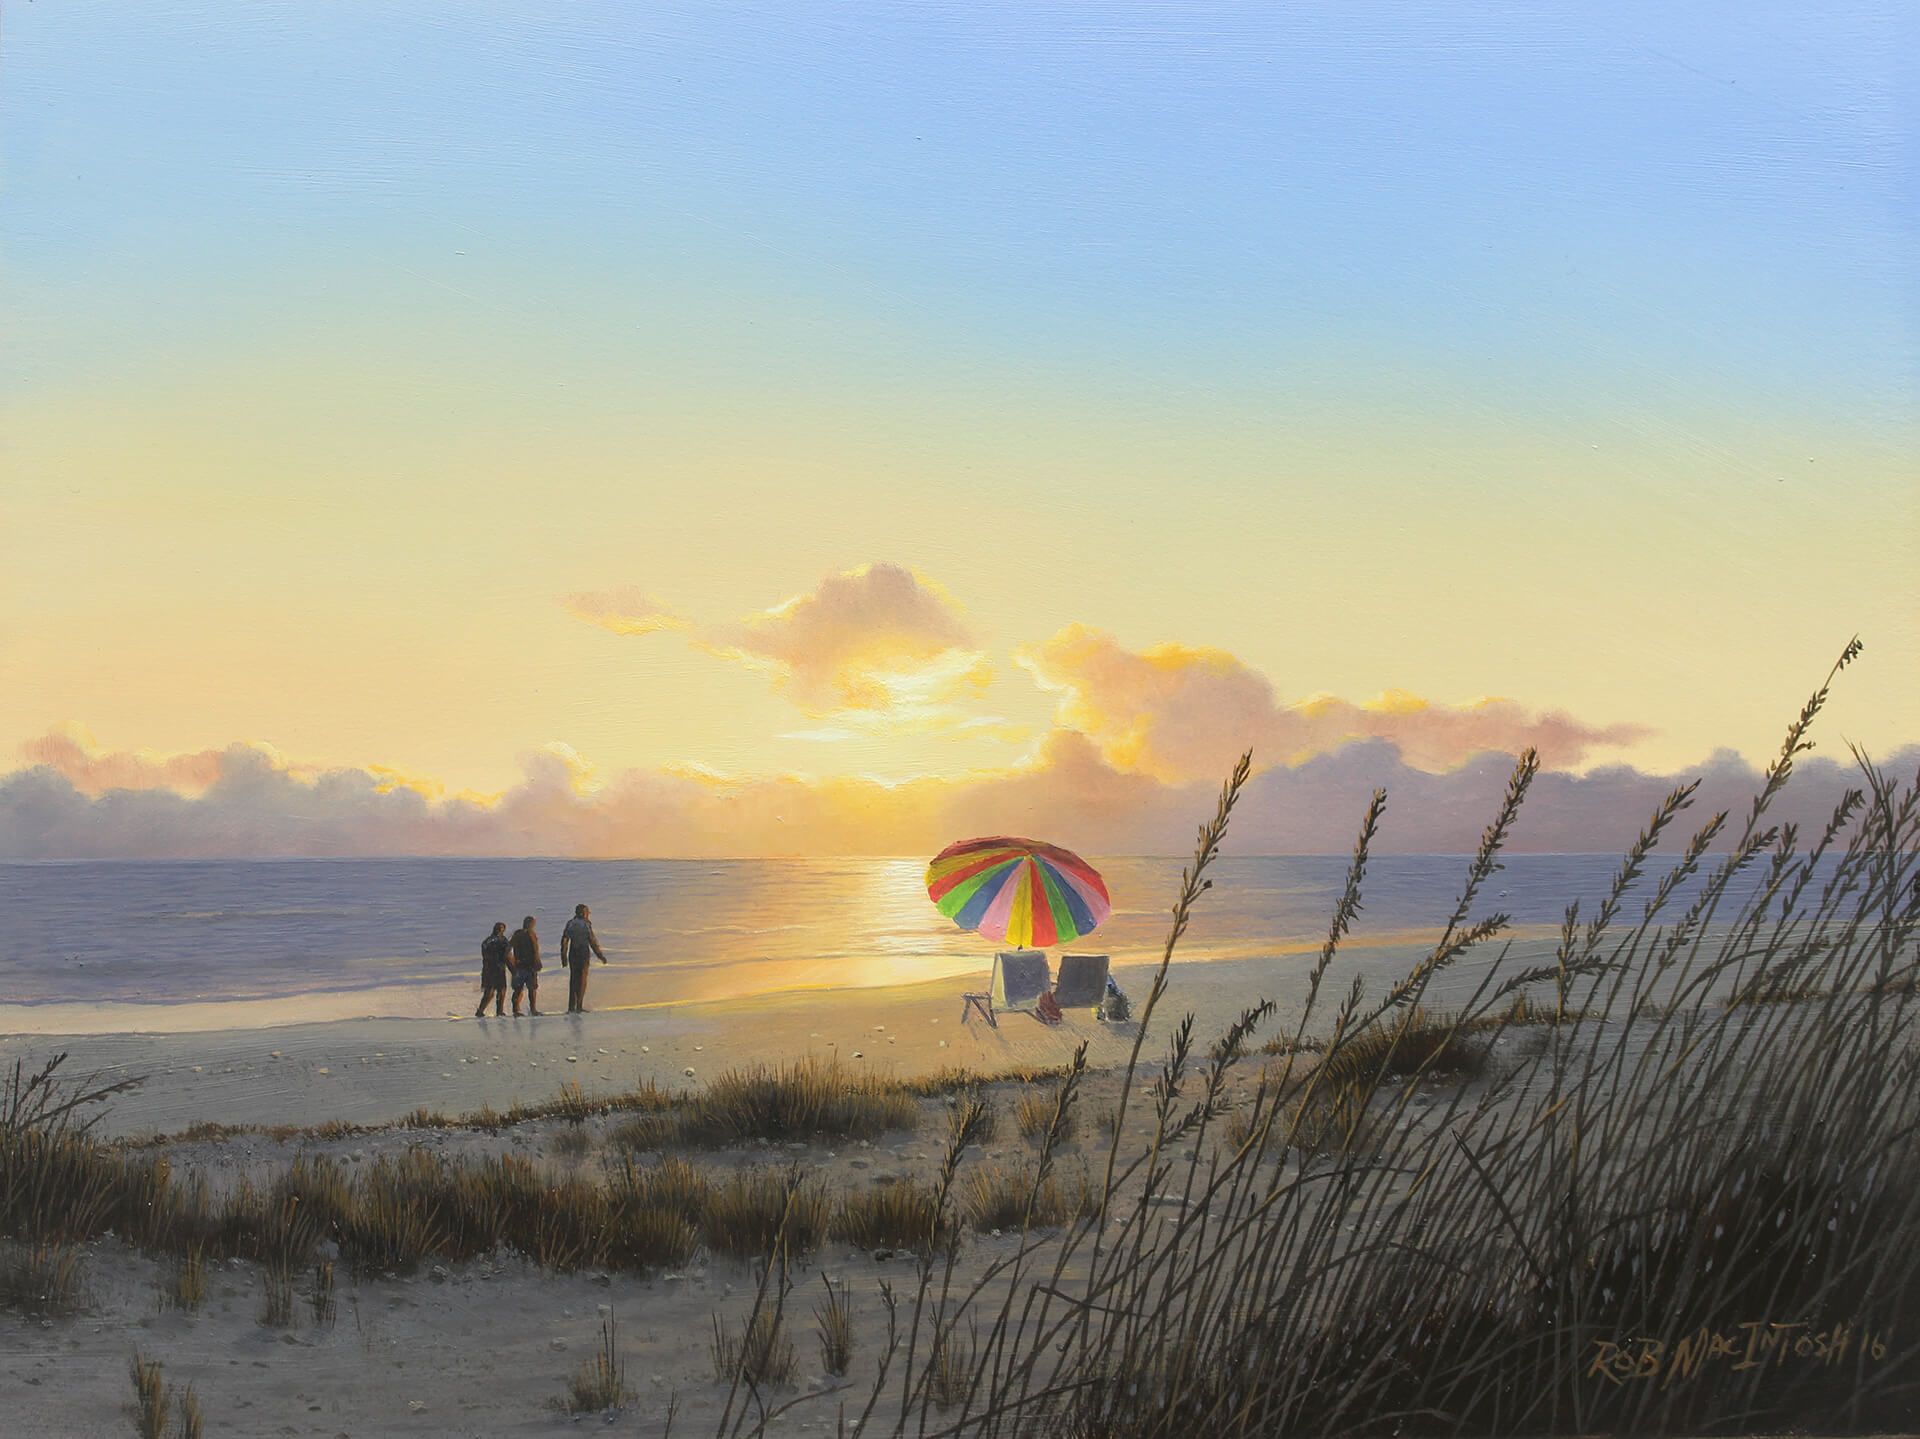 Photorealistic painting of a family enjoying a sunset on a beach